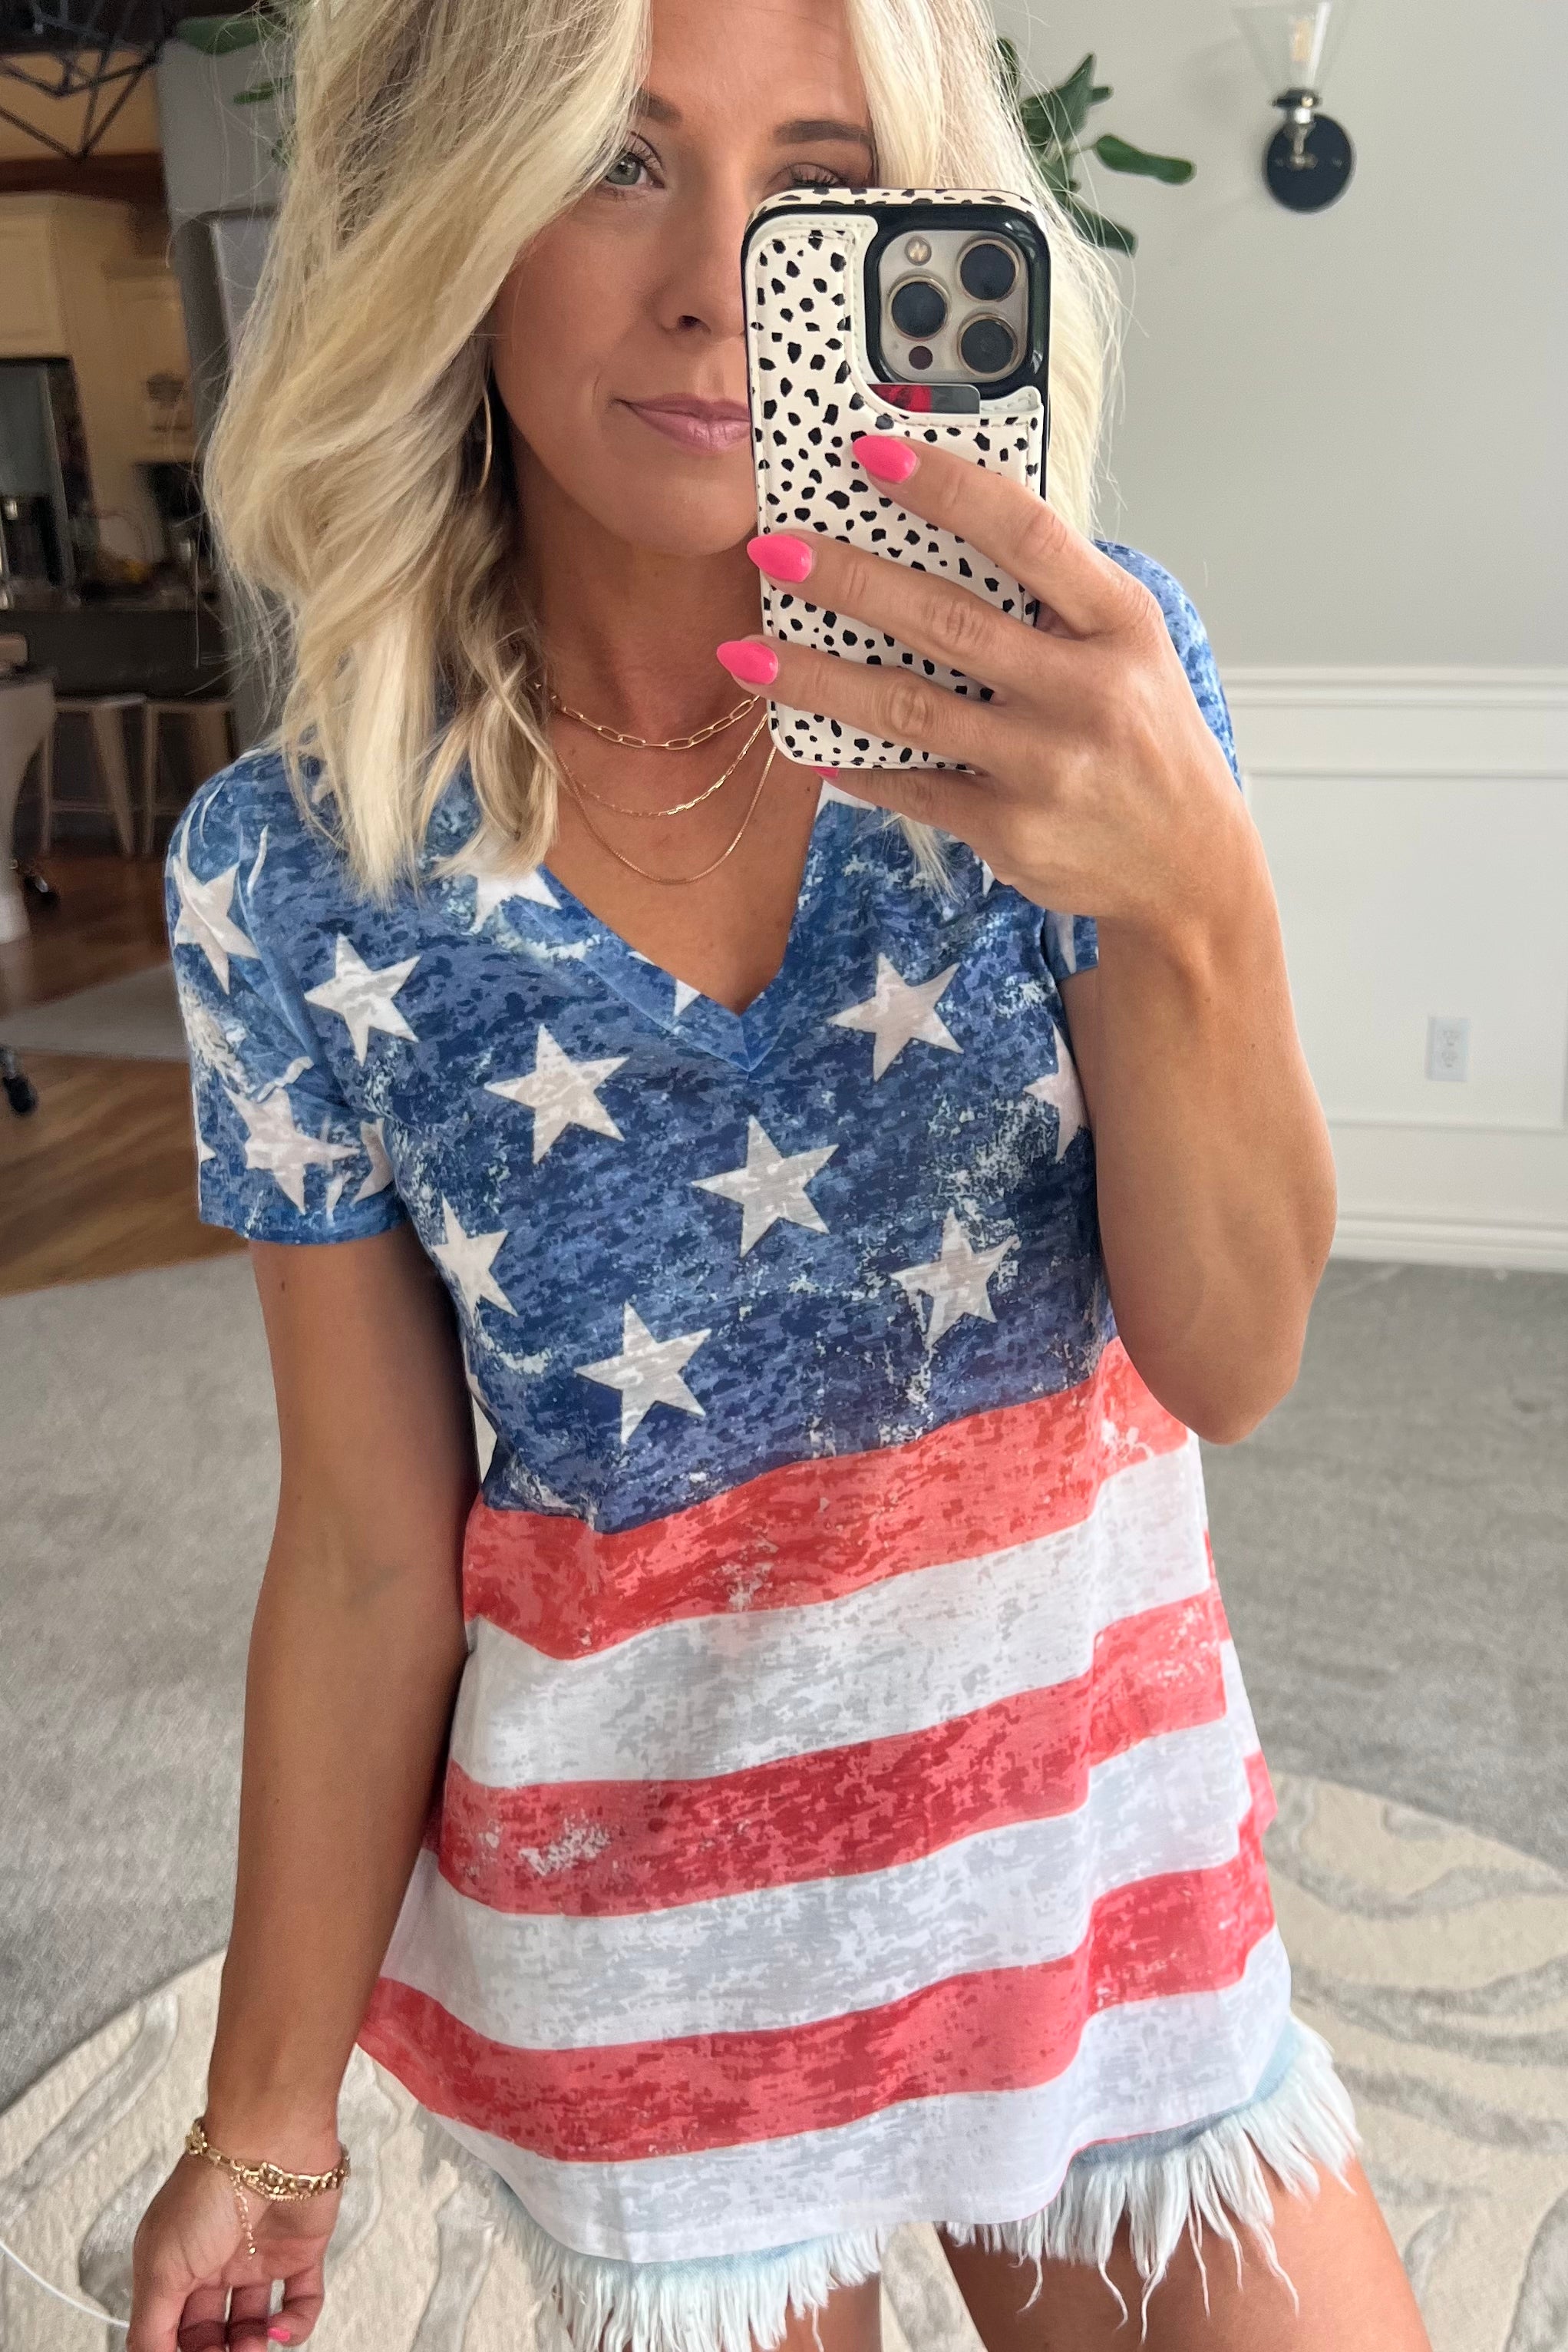 women wearing a red, white and blue American Flag V Neck tee and cut off denim shorts